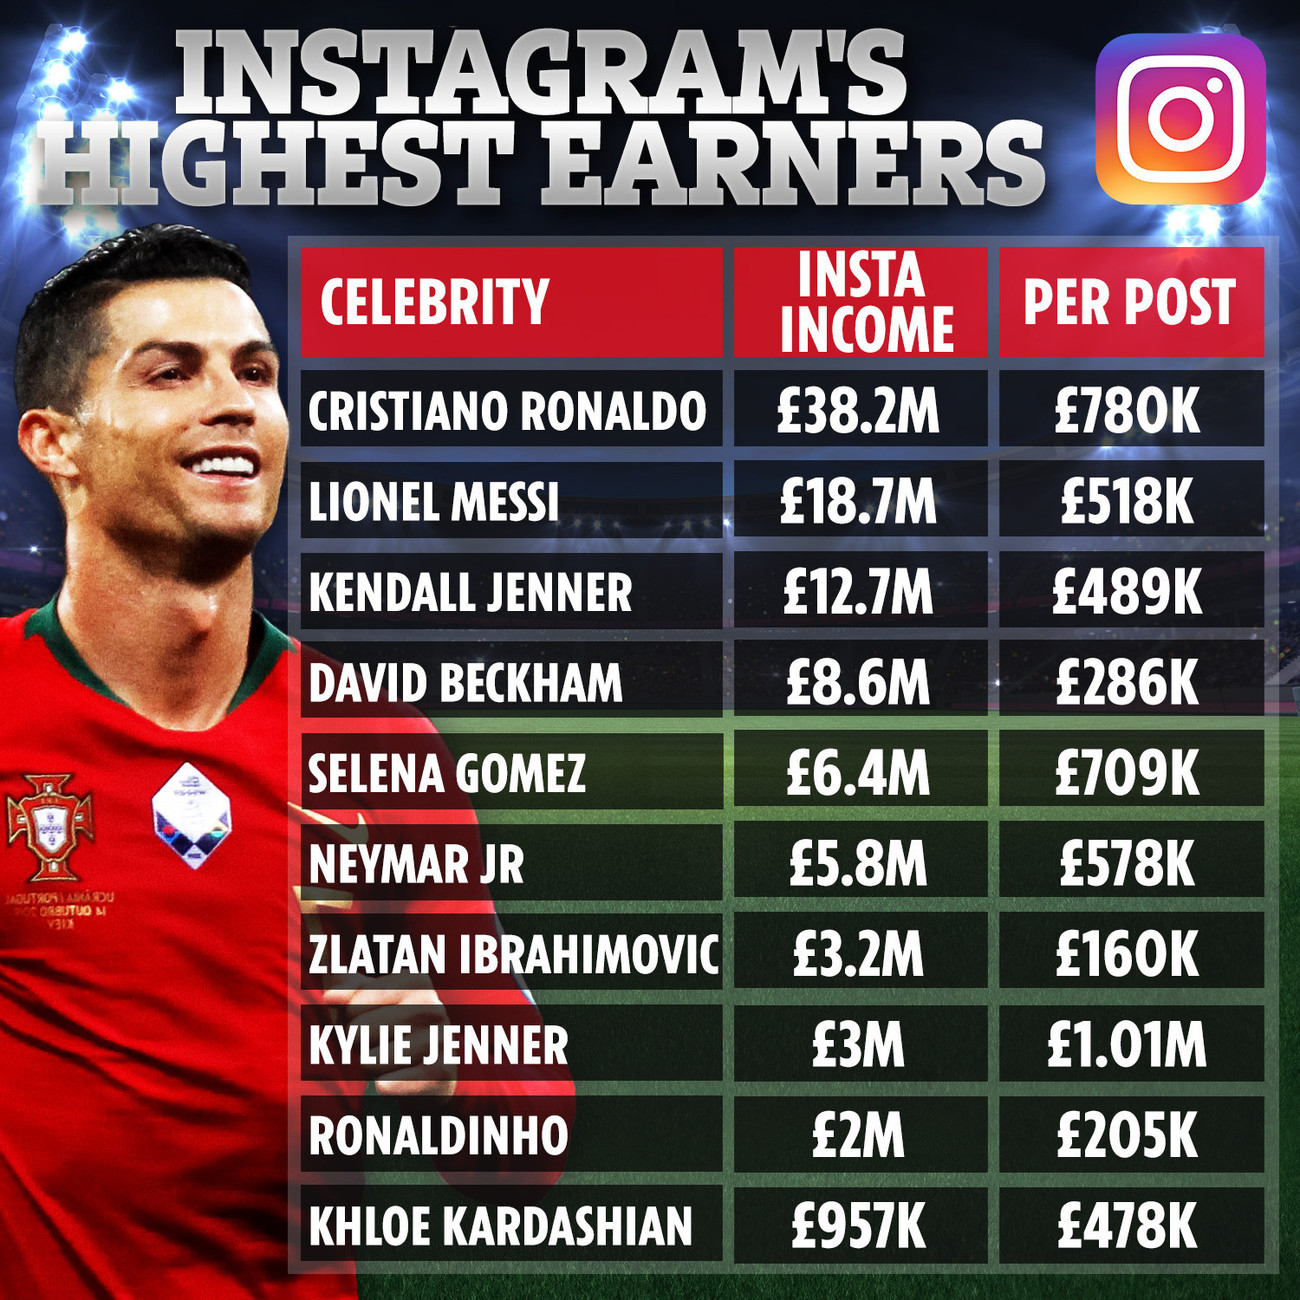 The list of Instagrams highest earners